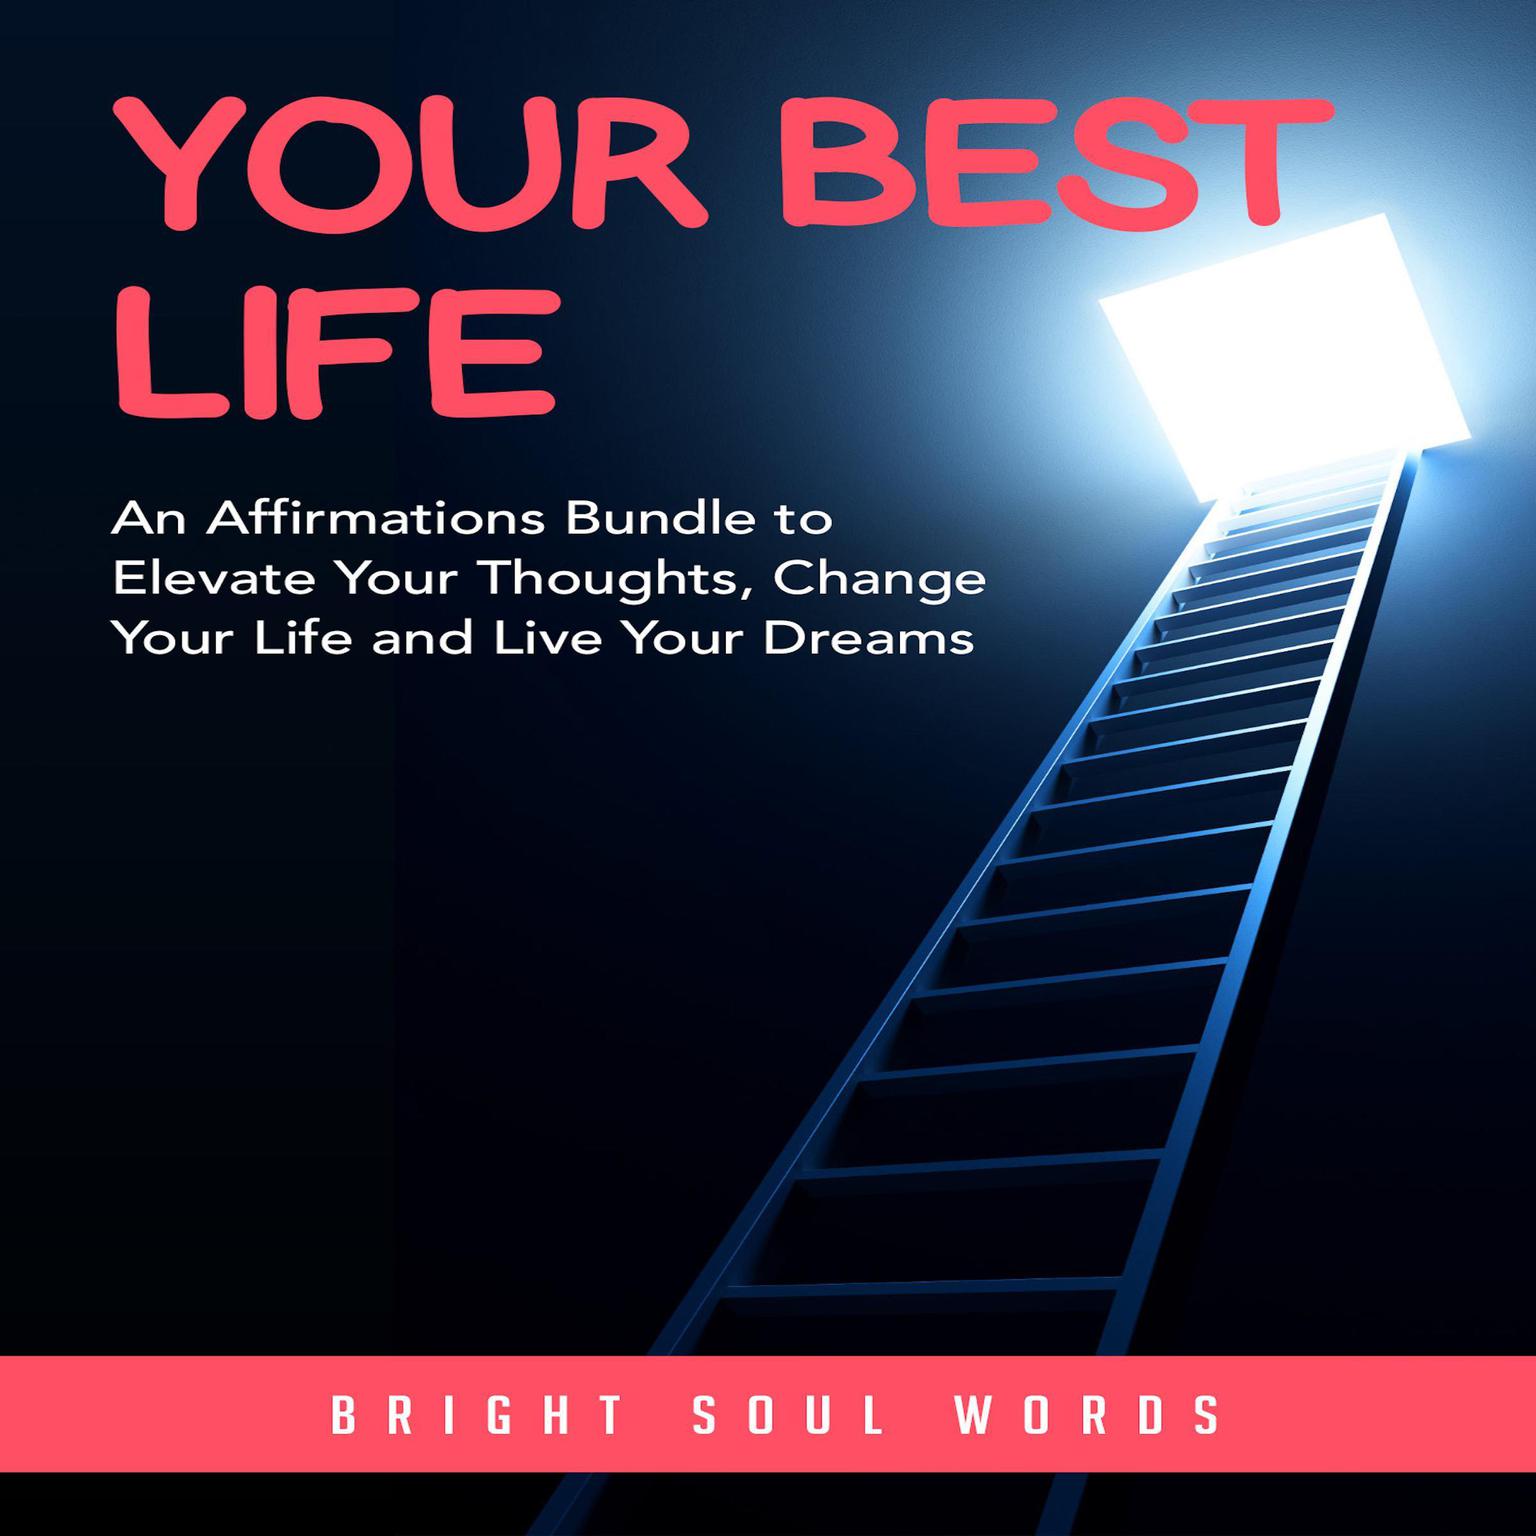 Your Best Life: An Affirmations Bundle to Elevate Your Thoughts, Change Your Life and Live Your Dreams Audiobook, by Bright Soul Words